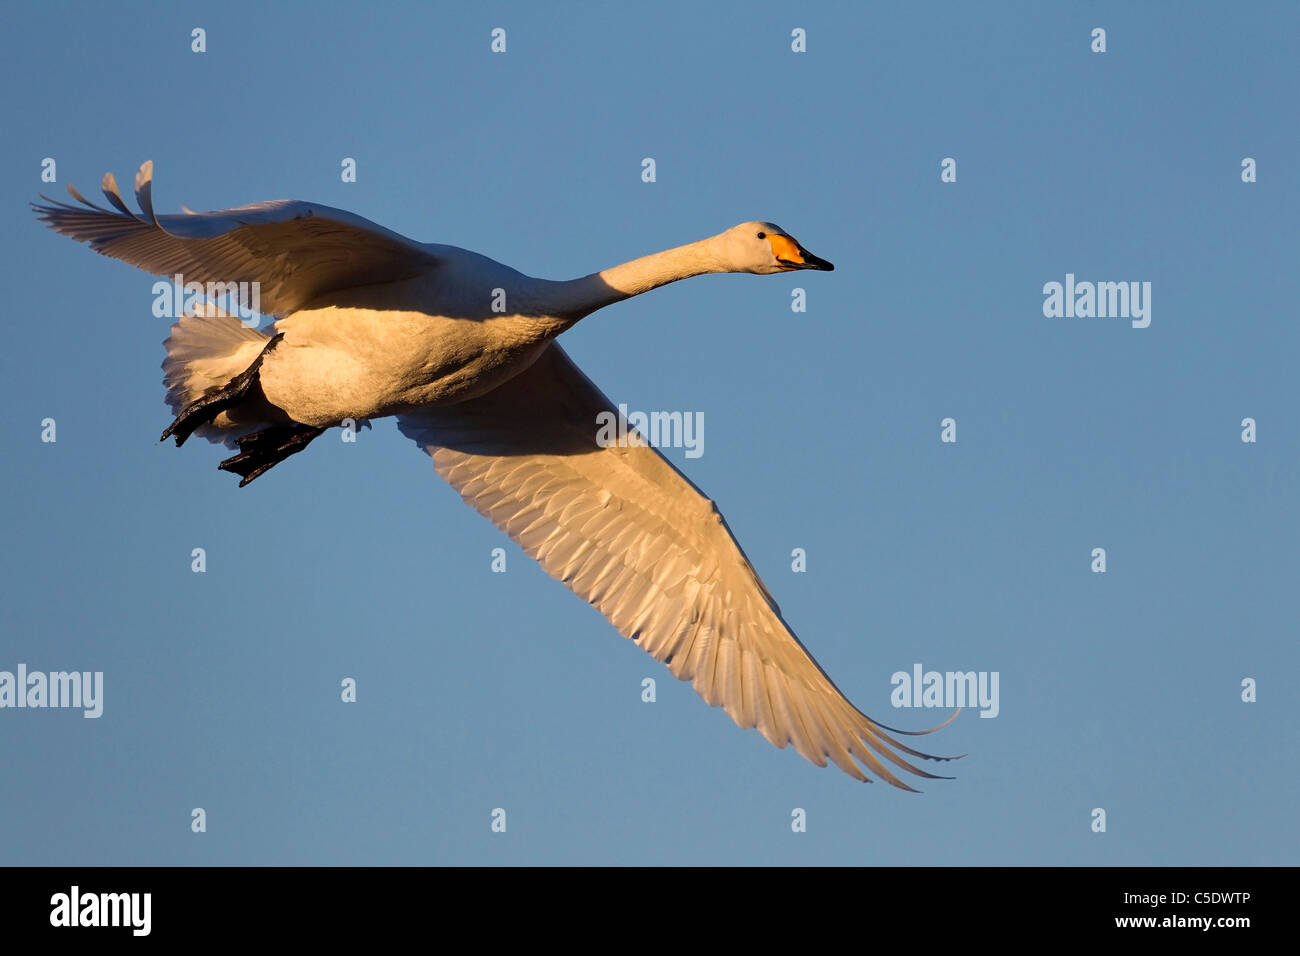 Low angle view of a whooper swan in flight against clear blue sky Stock Photo